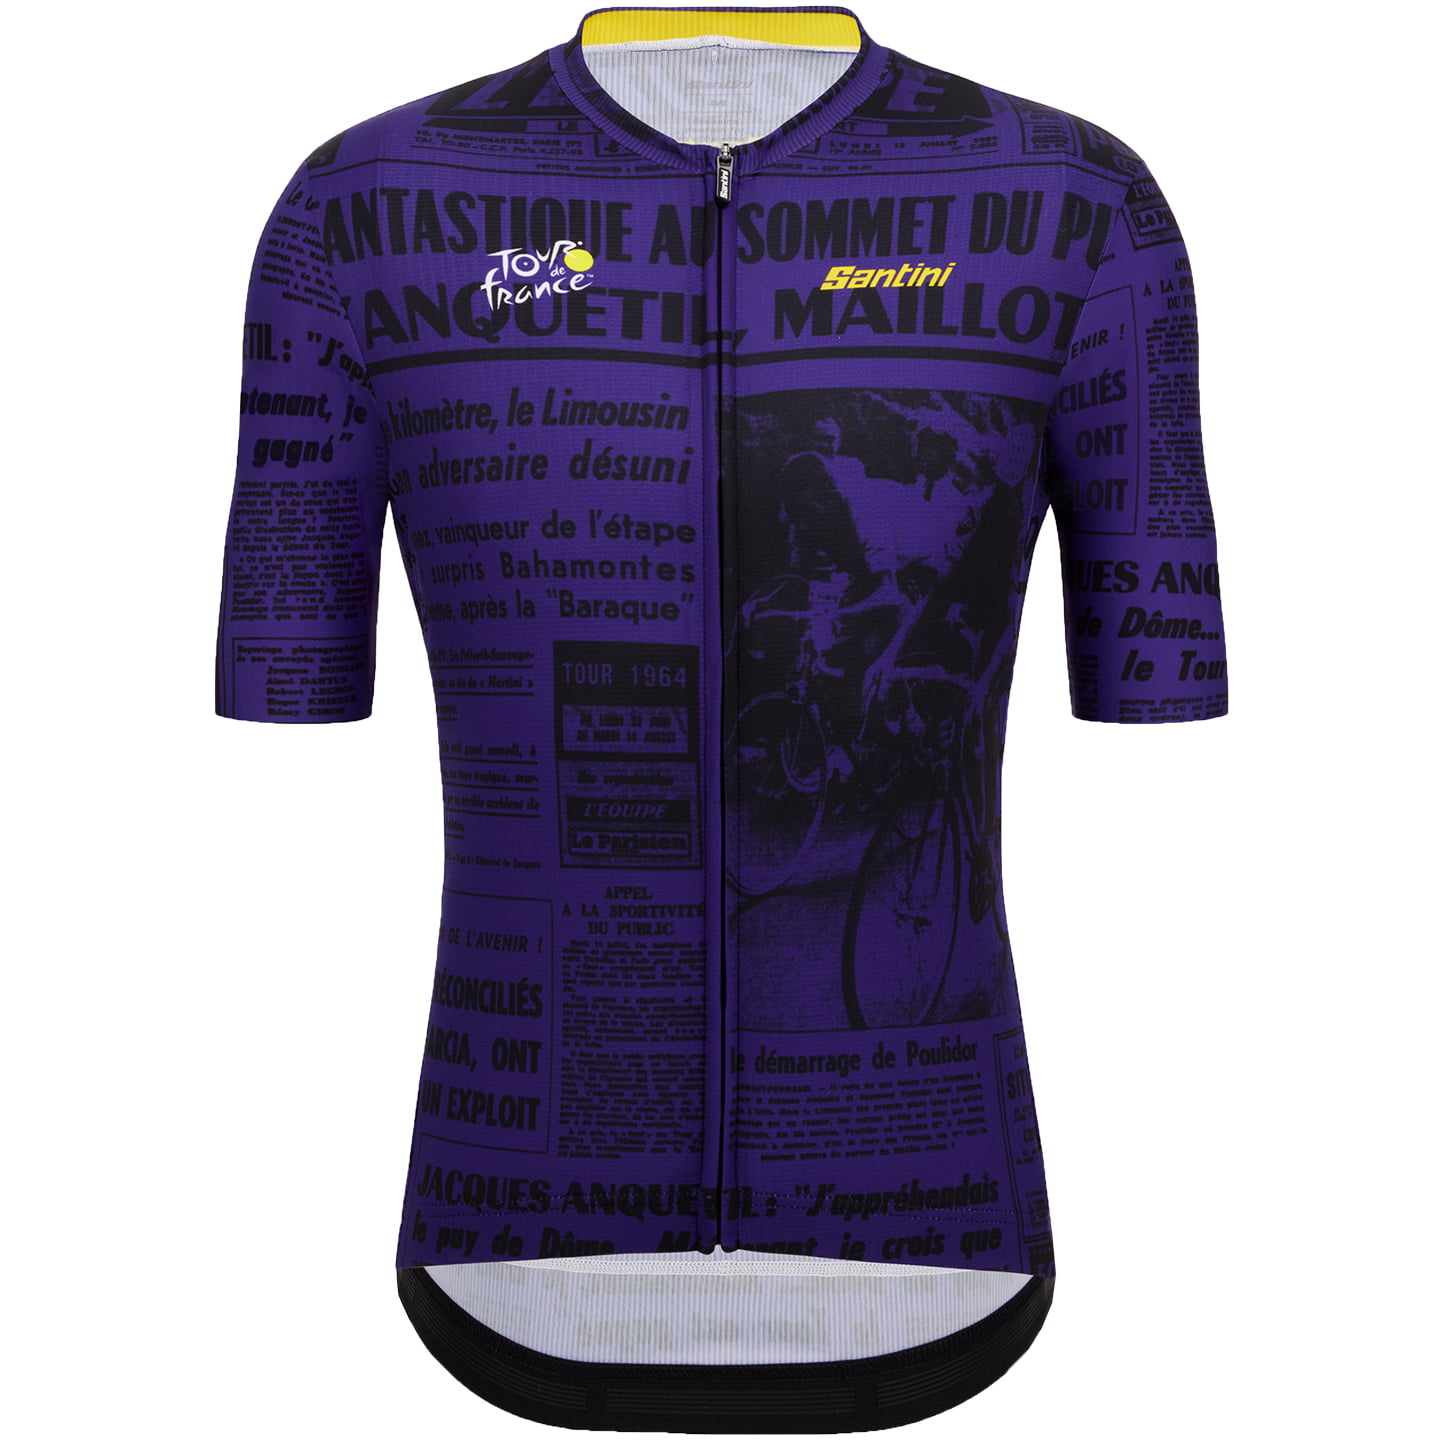 TOUR DE FRANCE Puy de Dome 2023 Short Sleeve Jersey, for men, size S, Cycling jersey, Cycling clothing